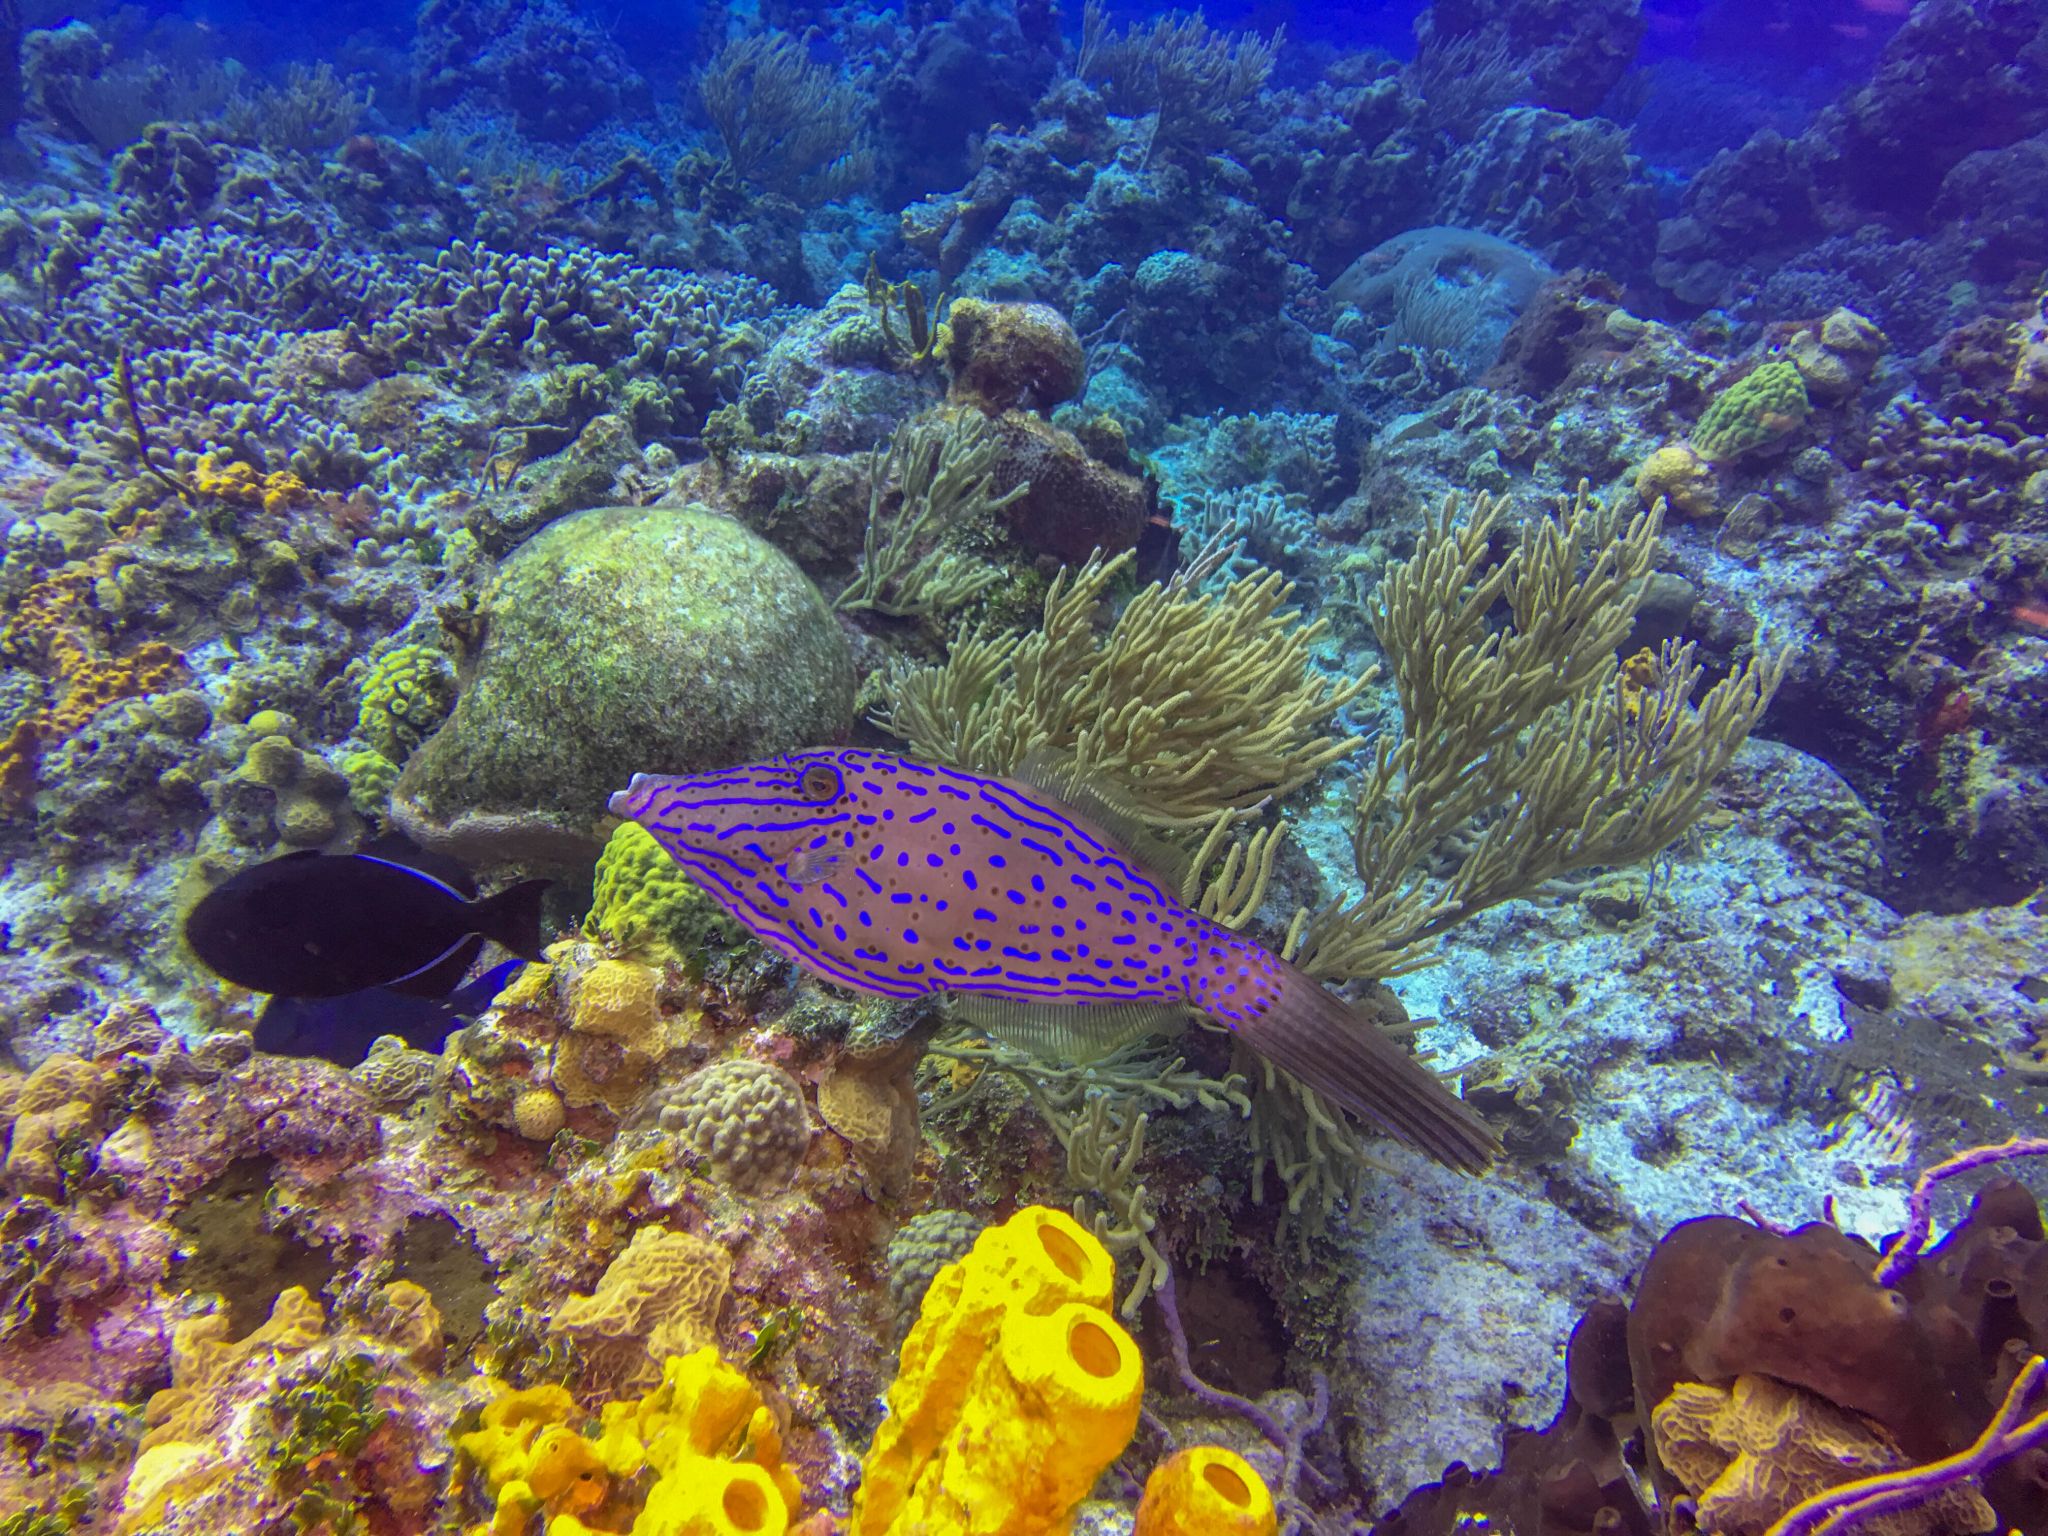 A colorful fish swims around a Cozumel coral reef during scuba diving.